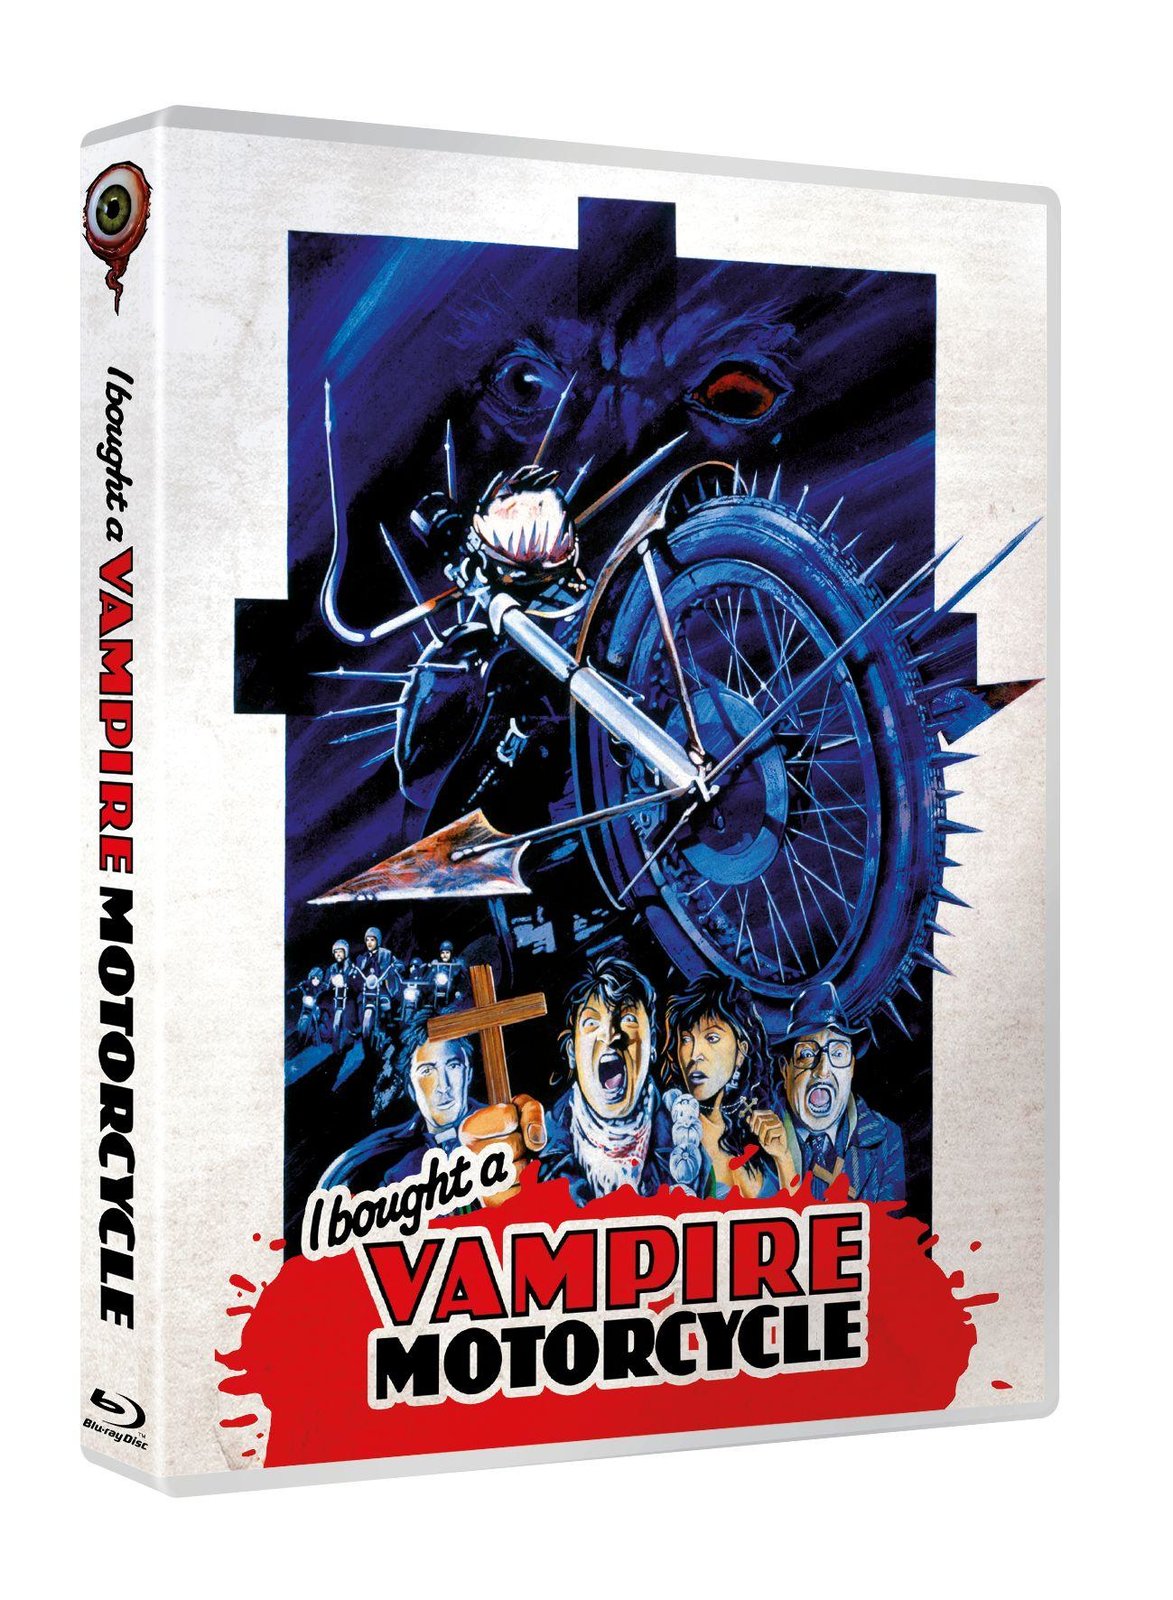 I Bought a Vampire Motorcycle - Uncut Mediabook Edition (DVD+blu-ray) (C)